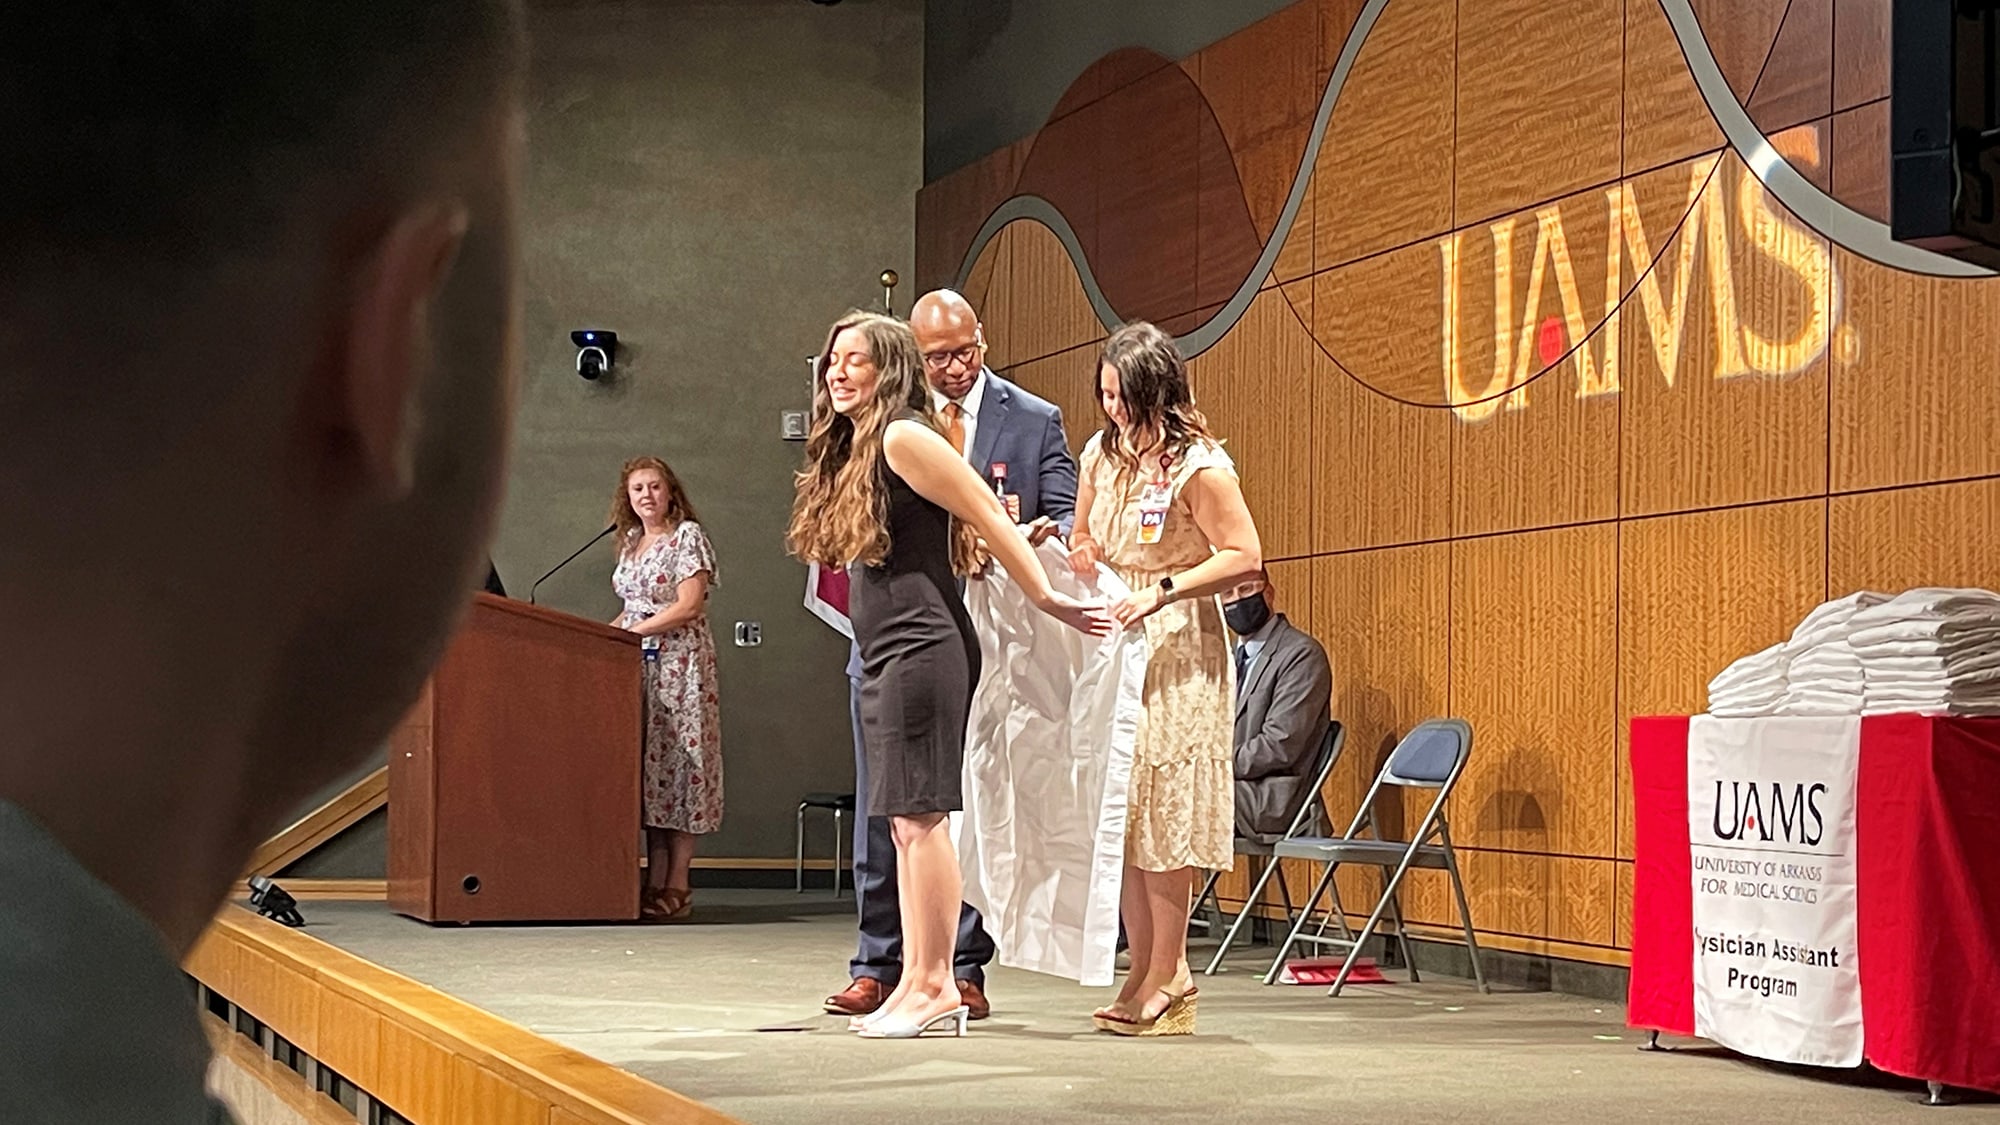 Joseph Frescura, left, waits to step onto the stage and watches as Edward Williams and Hillary Mayberry help Taryn Frazier put on her long, white coat as part of the Valediction Ceremony for the Physician Assistant Program's Class of 2022.